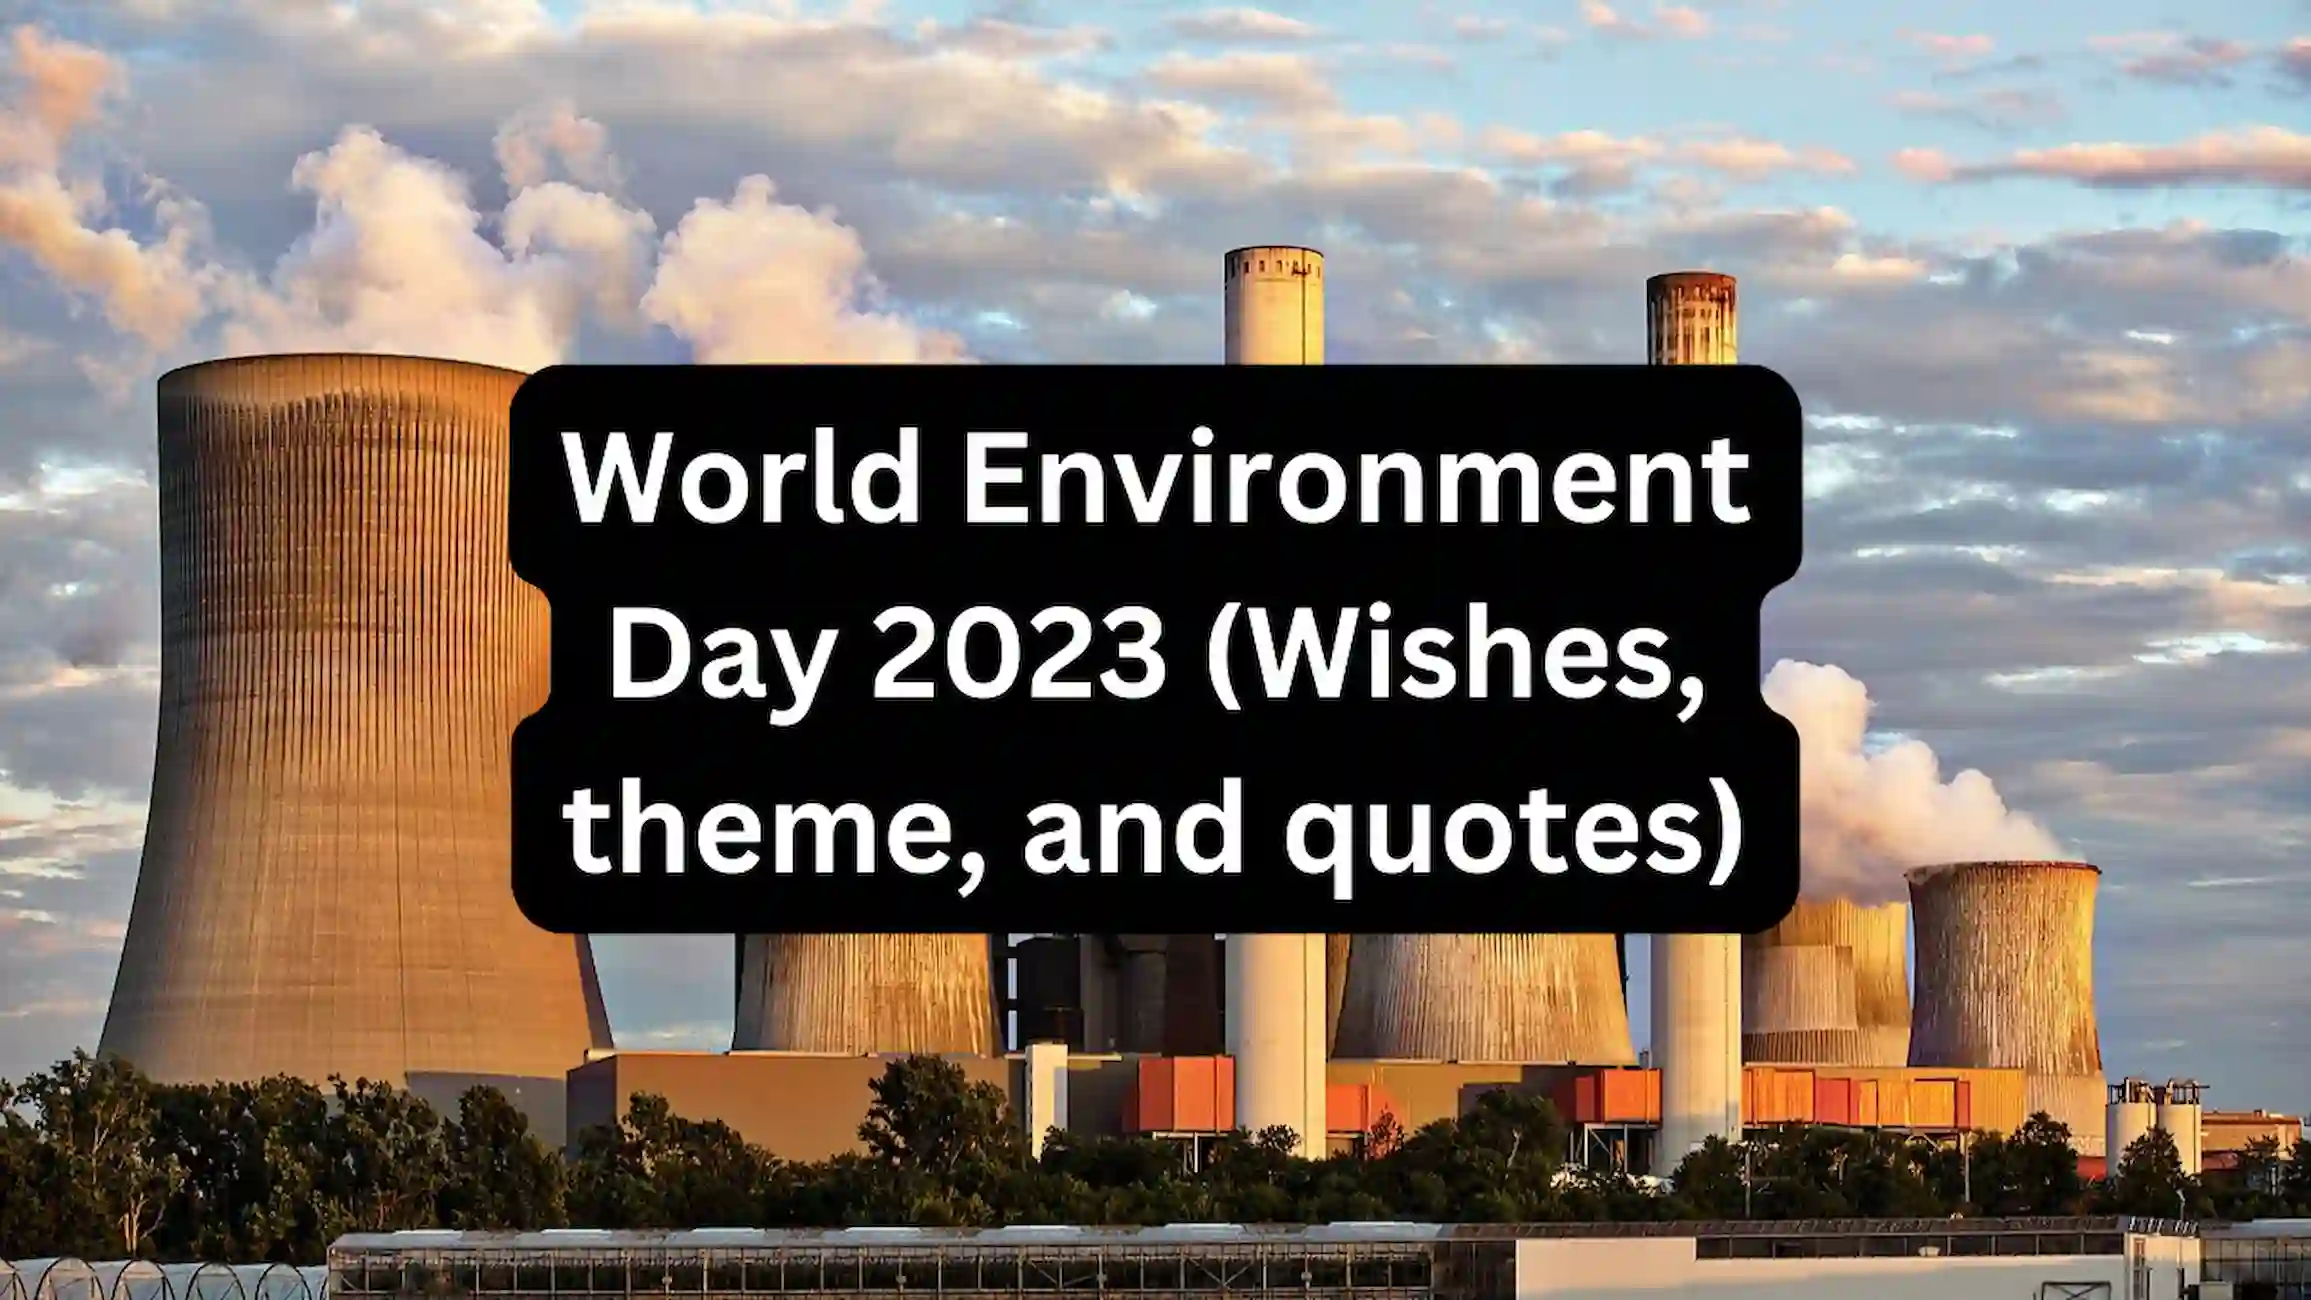 World Environment Day 2023 (Wishes, theme, and quotes)